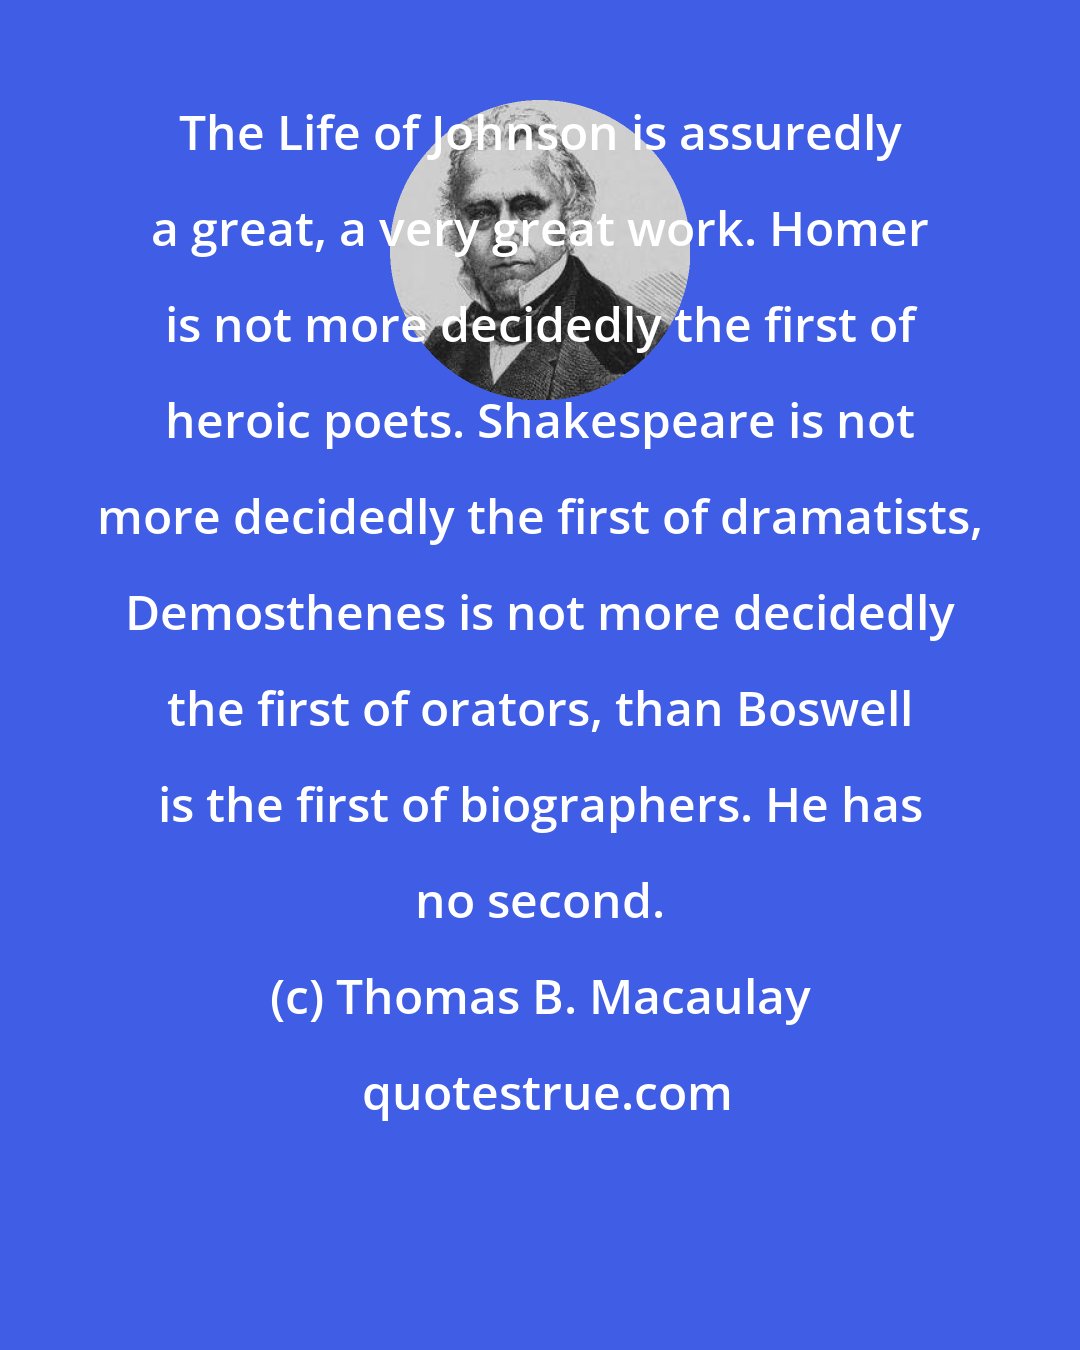 Thomas B. Macaulay: The Life of Johnson is assuredly a great, a very great work. Homer is not more decidedly the first of heroic poets. Shakespeare is not more decidedly the first of dramatists, Demosthenes is not more decidedly the first of orators, than Boswell is the first of biographers. He has no second.